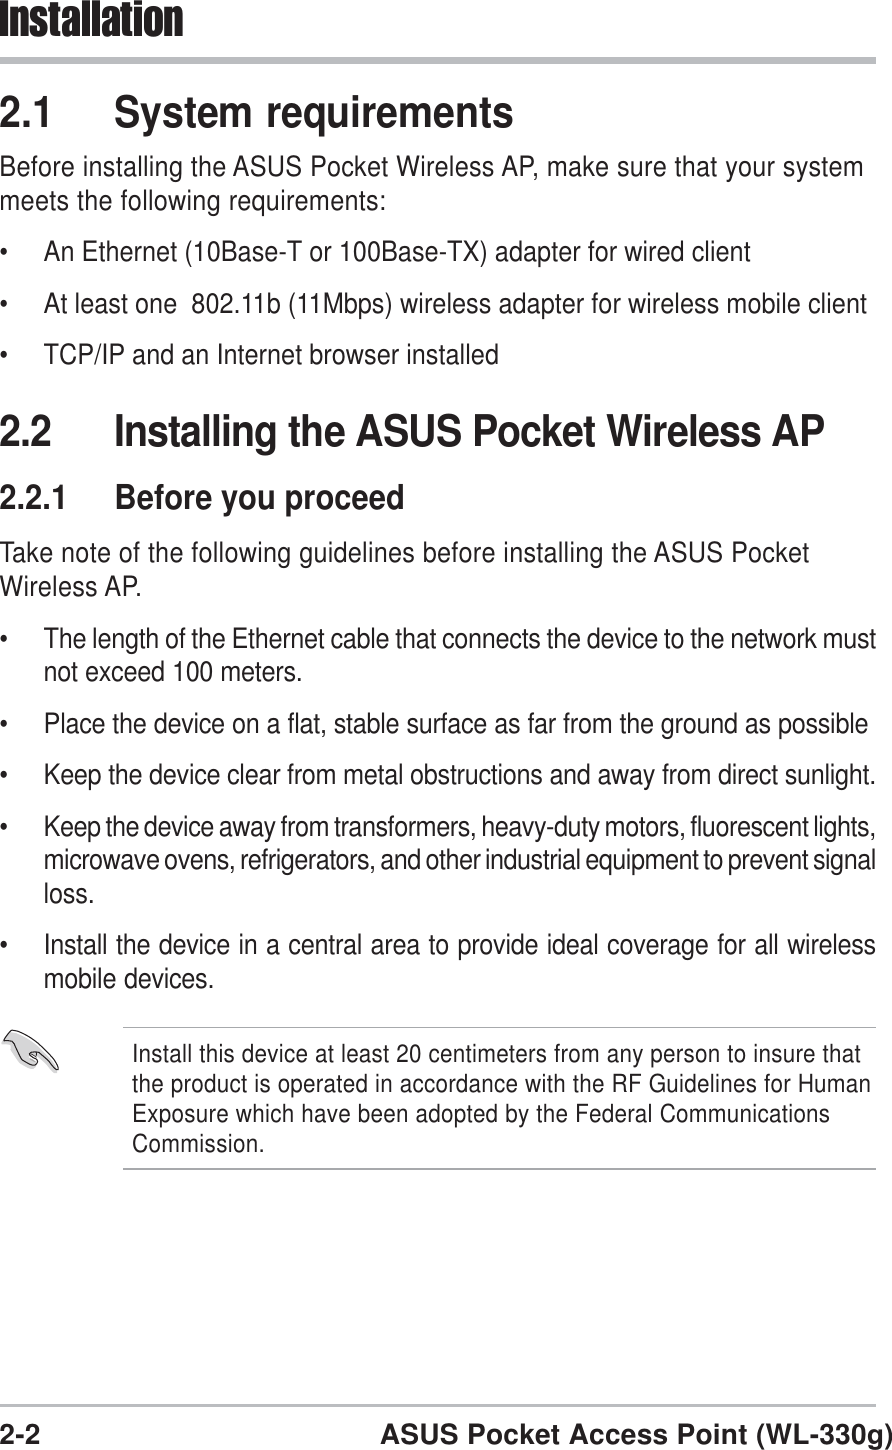 2-2 ASUS Pocket Access Point (WL-330g)Installation2.1 System requirementsBefore installing the ASUS Pocket Wireless AP, make sure that your systemmeets the following requirements:• An Ethernet (10Base-T or 100Base-TX) adapter for wired client• At least one  802.11b (11Mbps) wireless adapter for wireless mobile client• TCP/IP and an Internet browser installed2.2 Installing the ASUS Pocket Wireless AP2.2.1 Before you proceedTake note of the following guidelines before installing the ASUS PocketWireless AP.• The length of the Ethernet cable that connects the device to the network mustnot exceed 100 meters.• Place the device on a flat, stable surface as far from the ground as possible• Keep the device clear from metal obstructions and away from direct sunlight.• Keep the device away from transformers, heavy-duty motors, fluorescent lights,microwave ovens, refrigerators, and other industrial equipment to prevent signalloss.• Install the device in a central area to provide ideal coverage for all wirelessmobile devices.Install this device at least 20 centimeters from any person to insure thatthe product is operated in accordance with the RF Guidelines for HumanExposure which have been adopted by the Federal CommunicationsCommission.